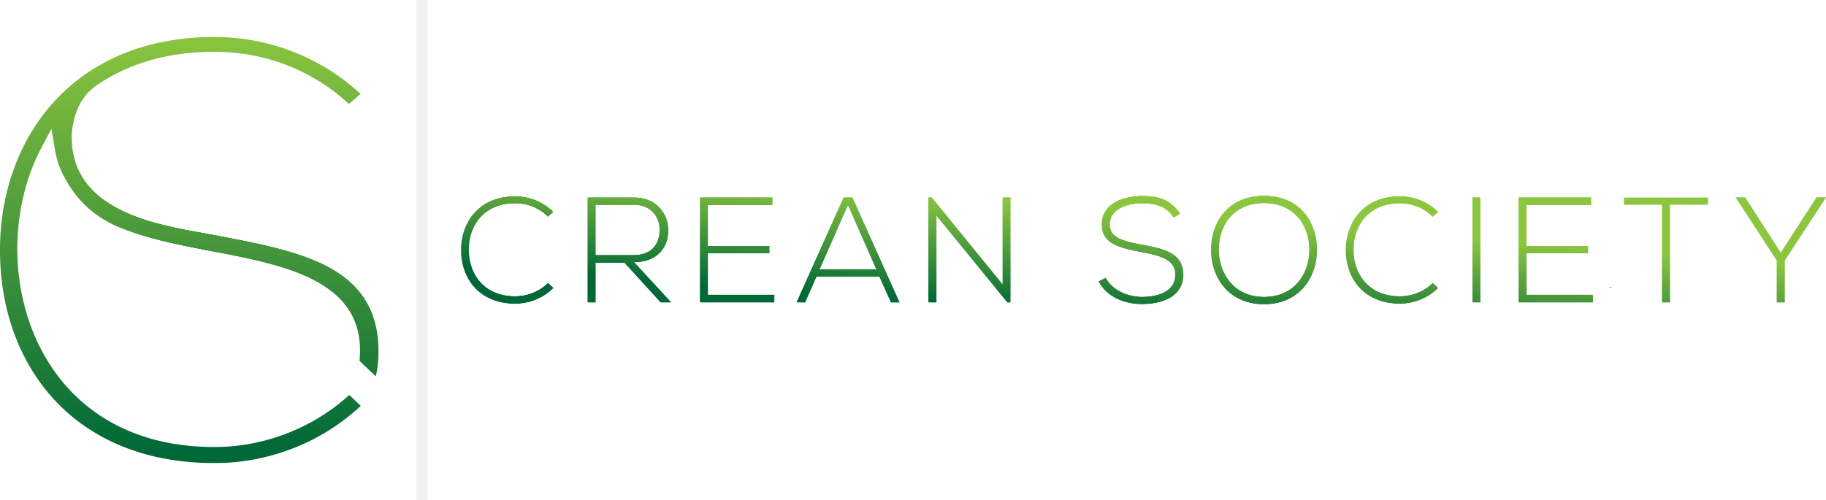 Coastal Research, Education, and Advocacy Network (CREAN)